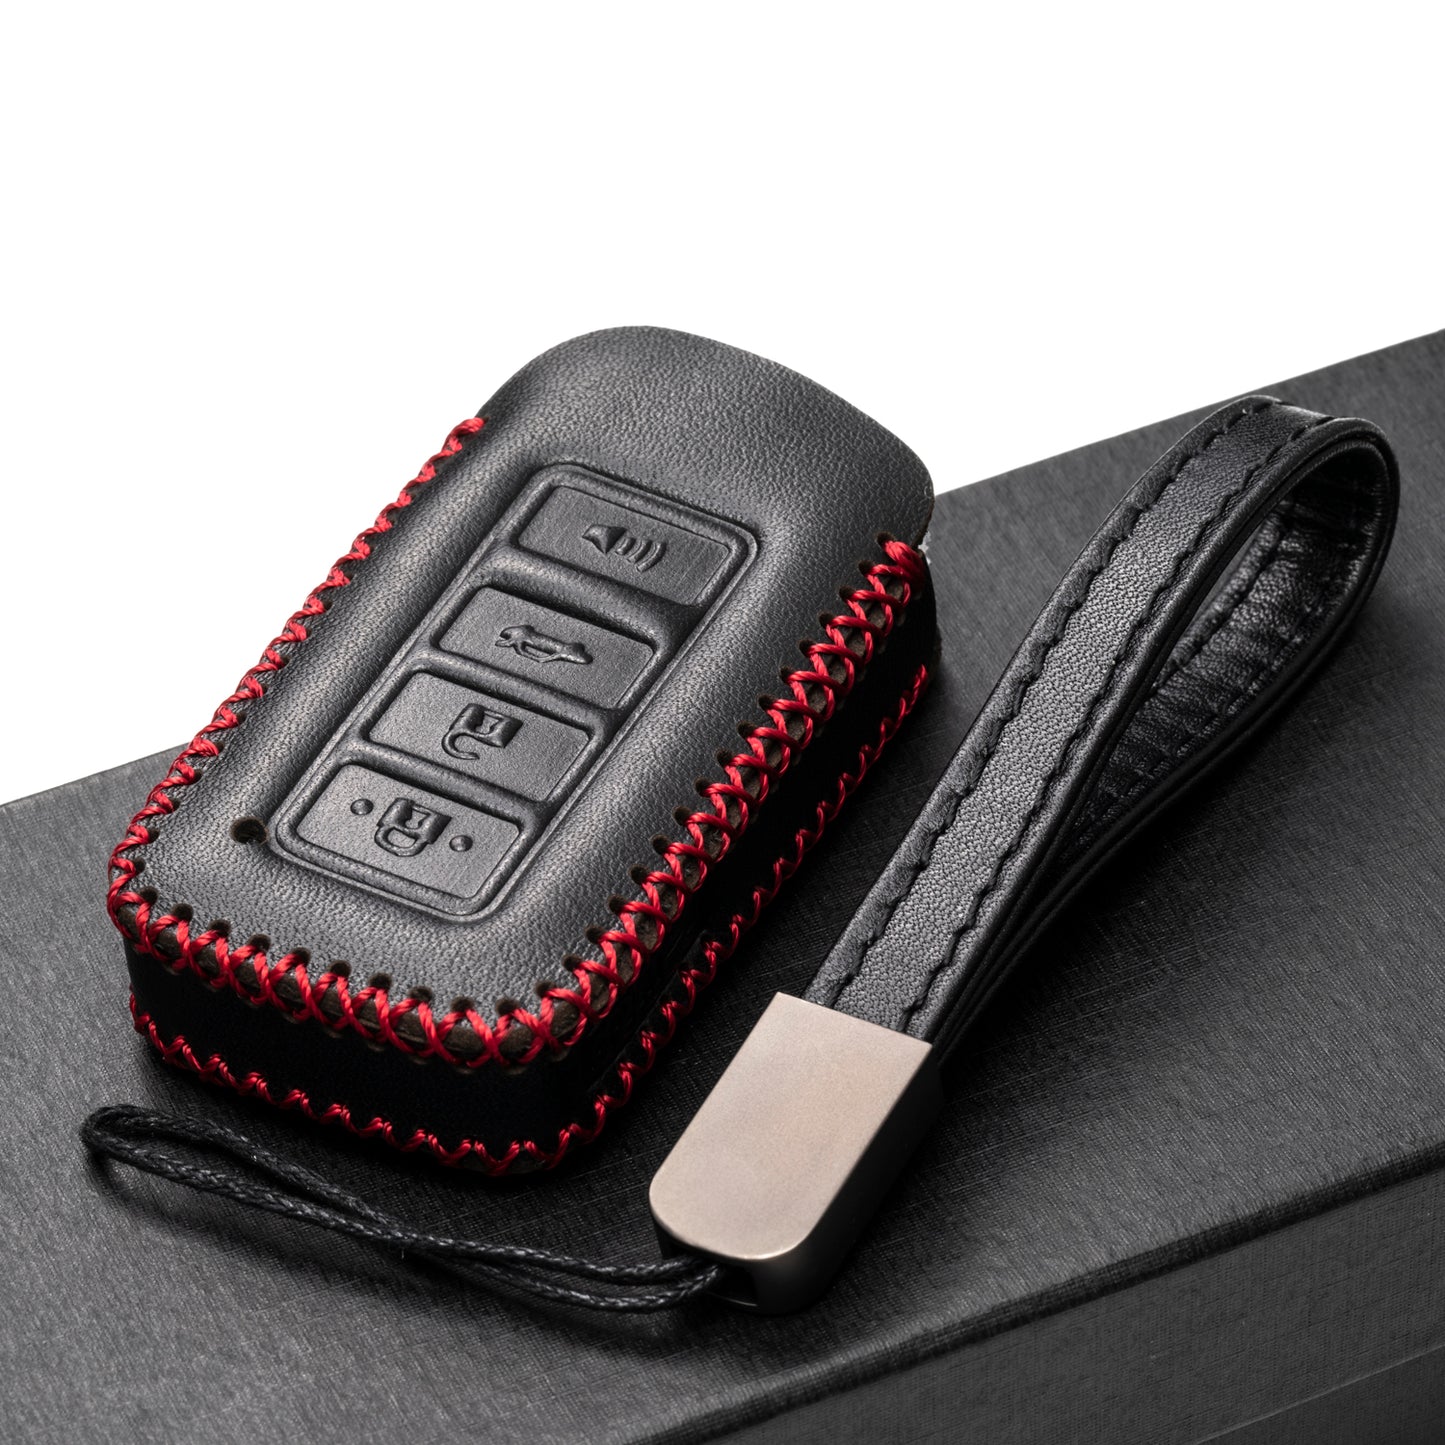 Vitodeco 4-Button Genuine Leather Smart Key Fob Case Cover Protector Compatible for 2014-2021 Lexus UX, NX, RX, GX, LX, is, ES, GS, LS